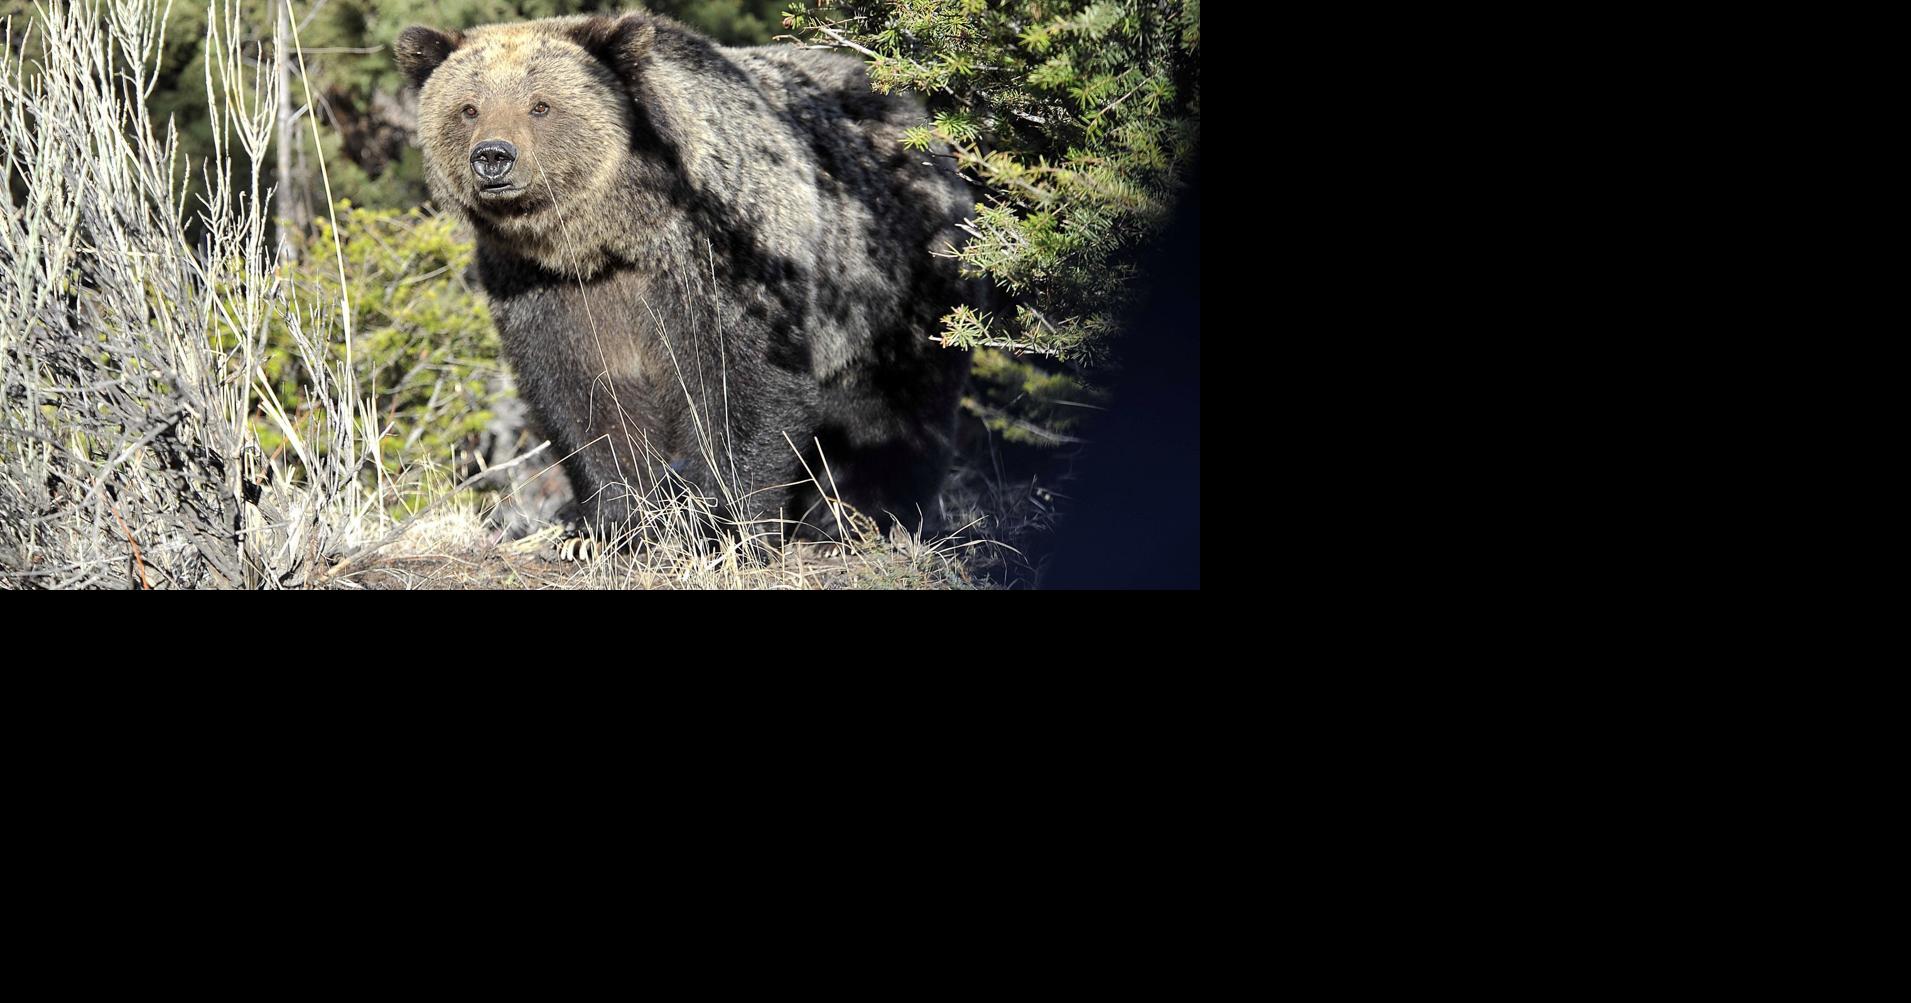 New A.I. Offers Facial Recognition for Grizzly Bears, Smart News